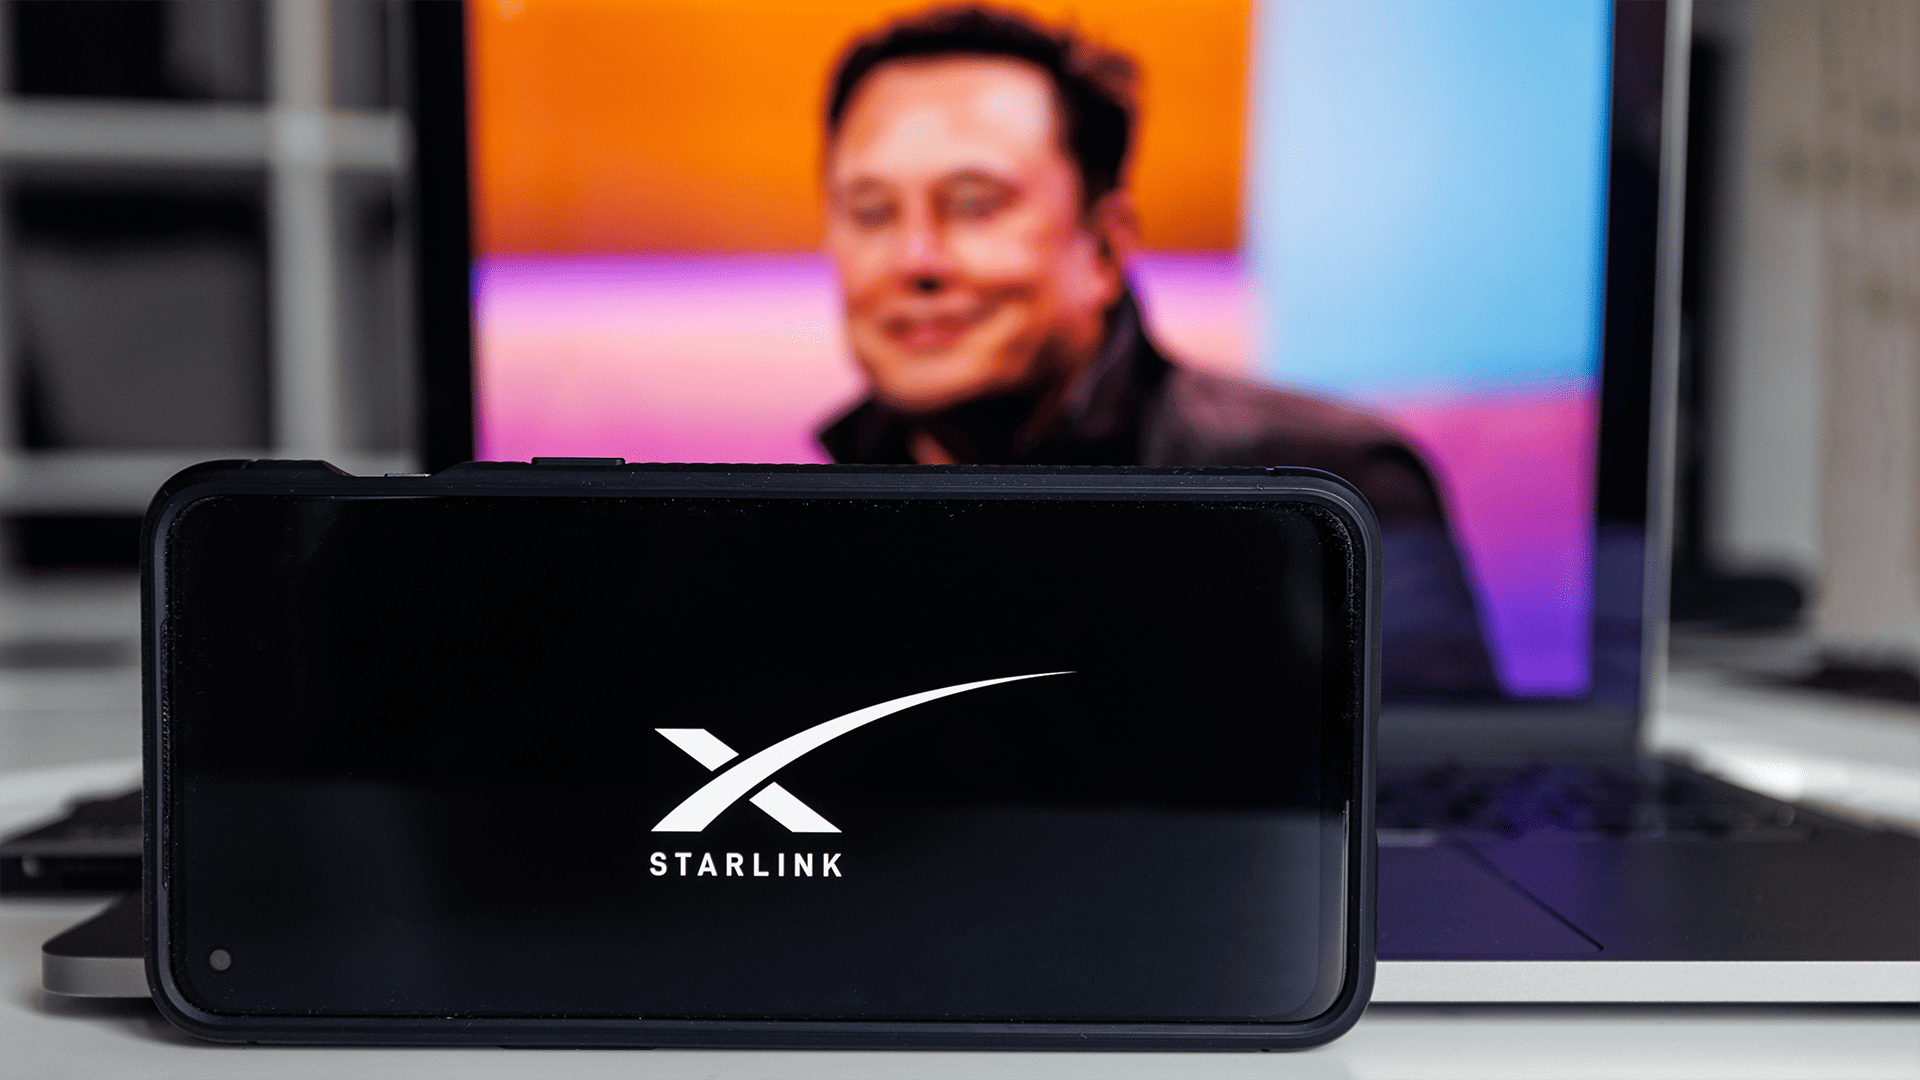 A smartphone with Starlink on it with Elon Musk’s picture on a laptop in the background.